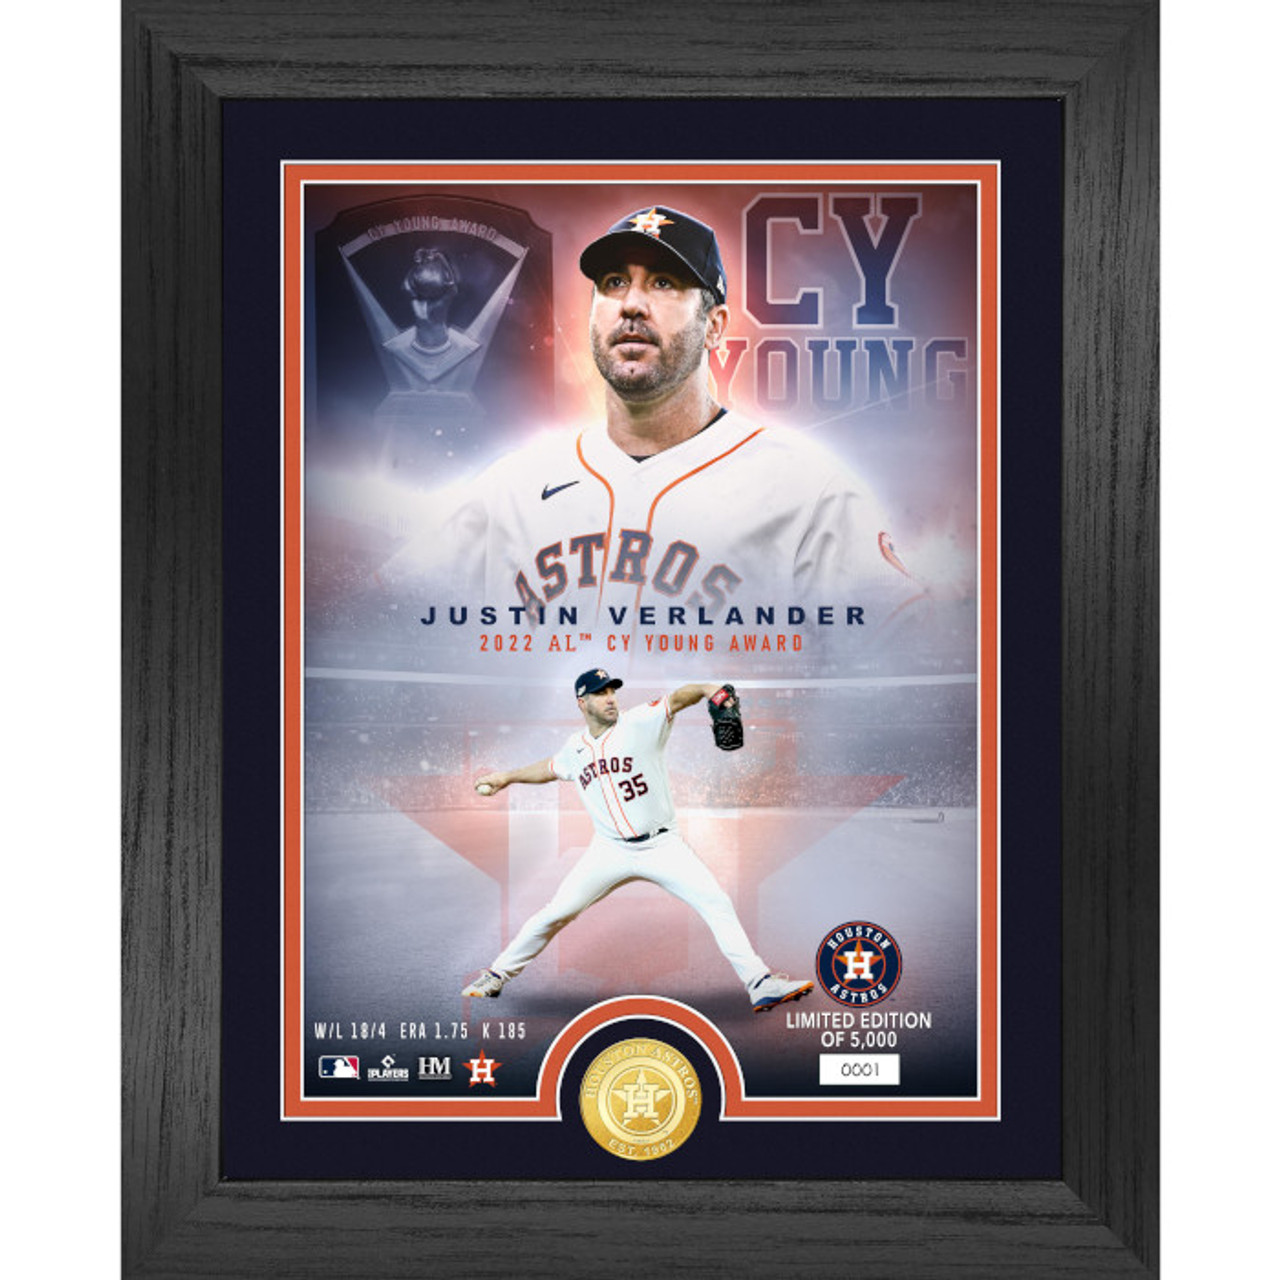 Get a Justin Verlander jersey at Fanatics for 30% off today